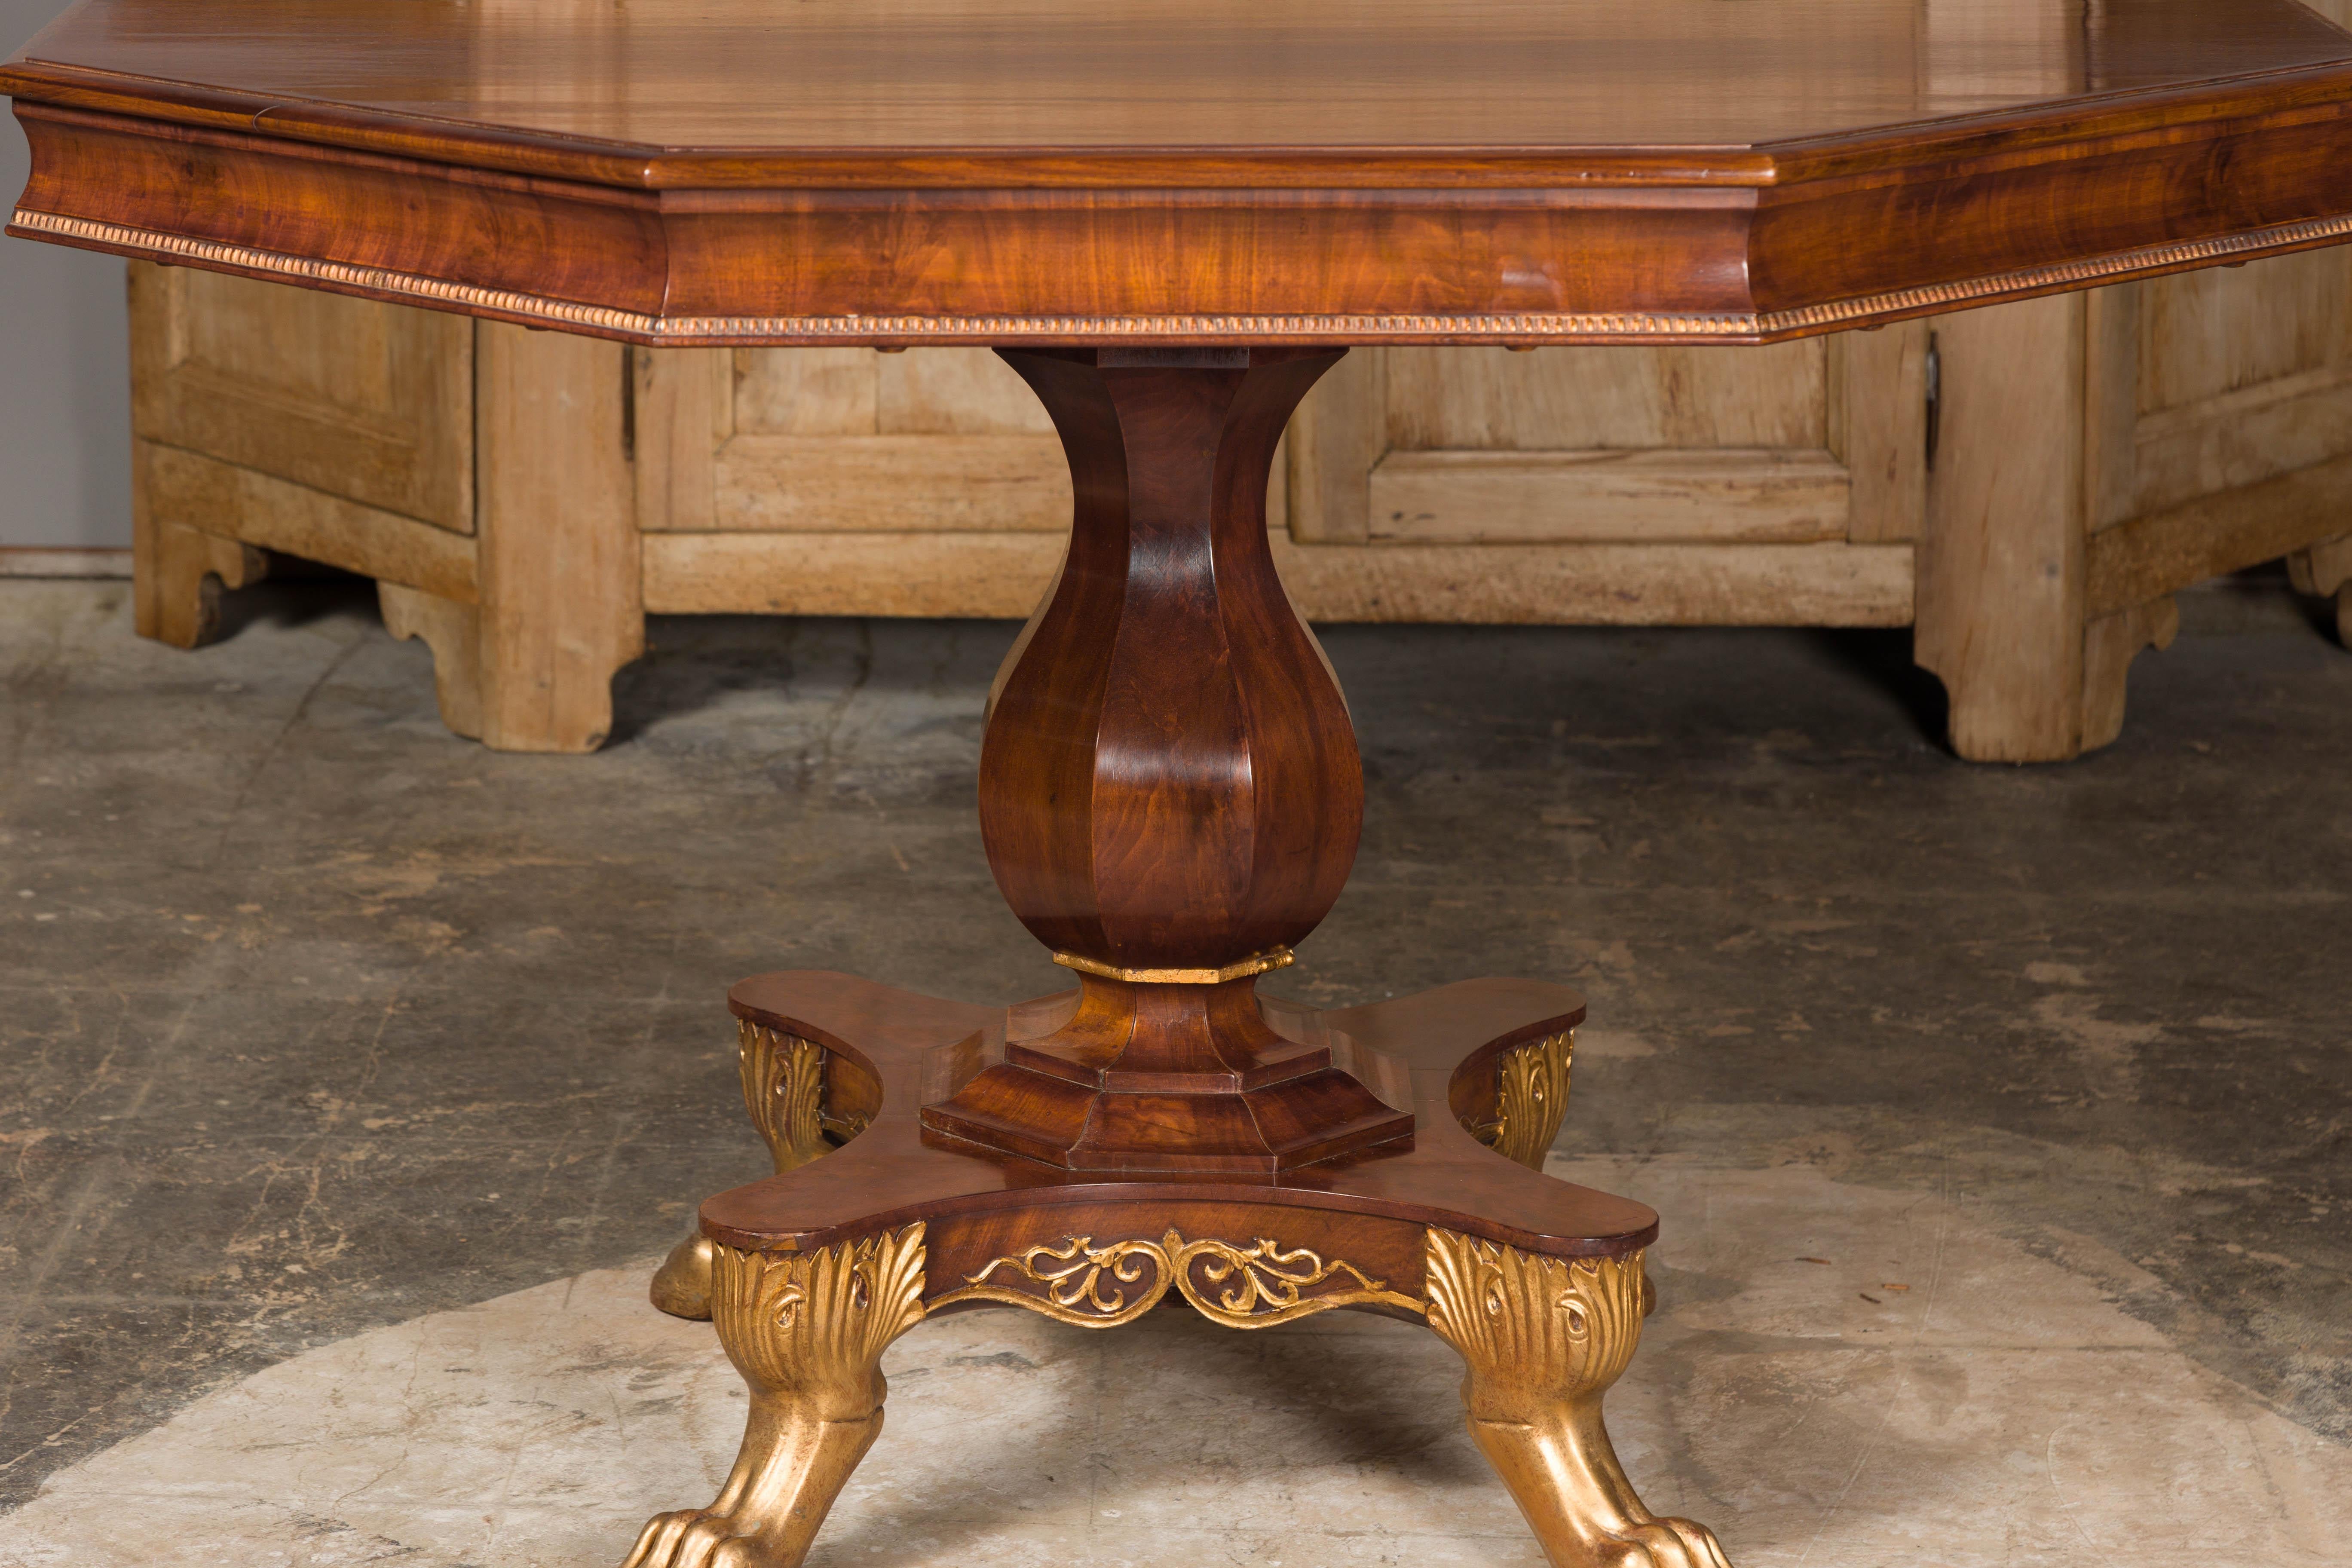 English Regency 1820s Mahogany Center Table with Octagonal Top and Gilt Paws In Good Condition For Sale In Atlanta, GA